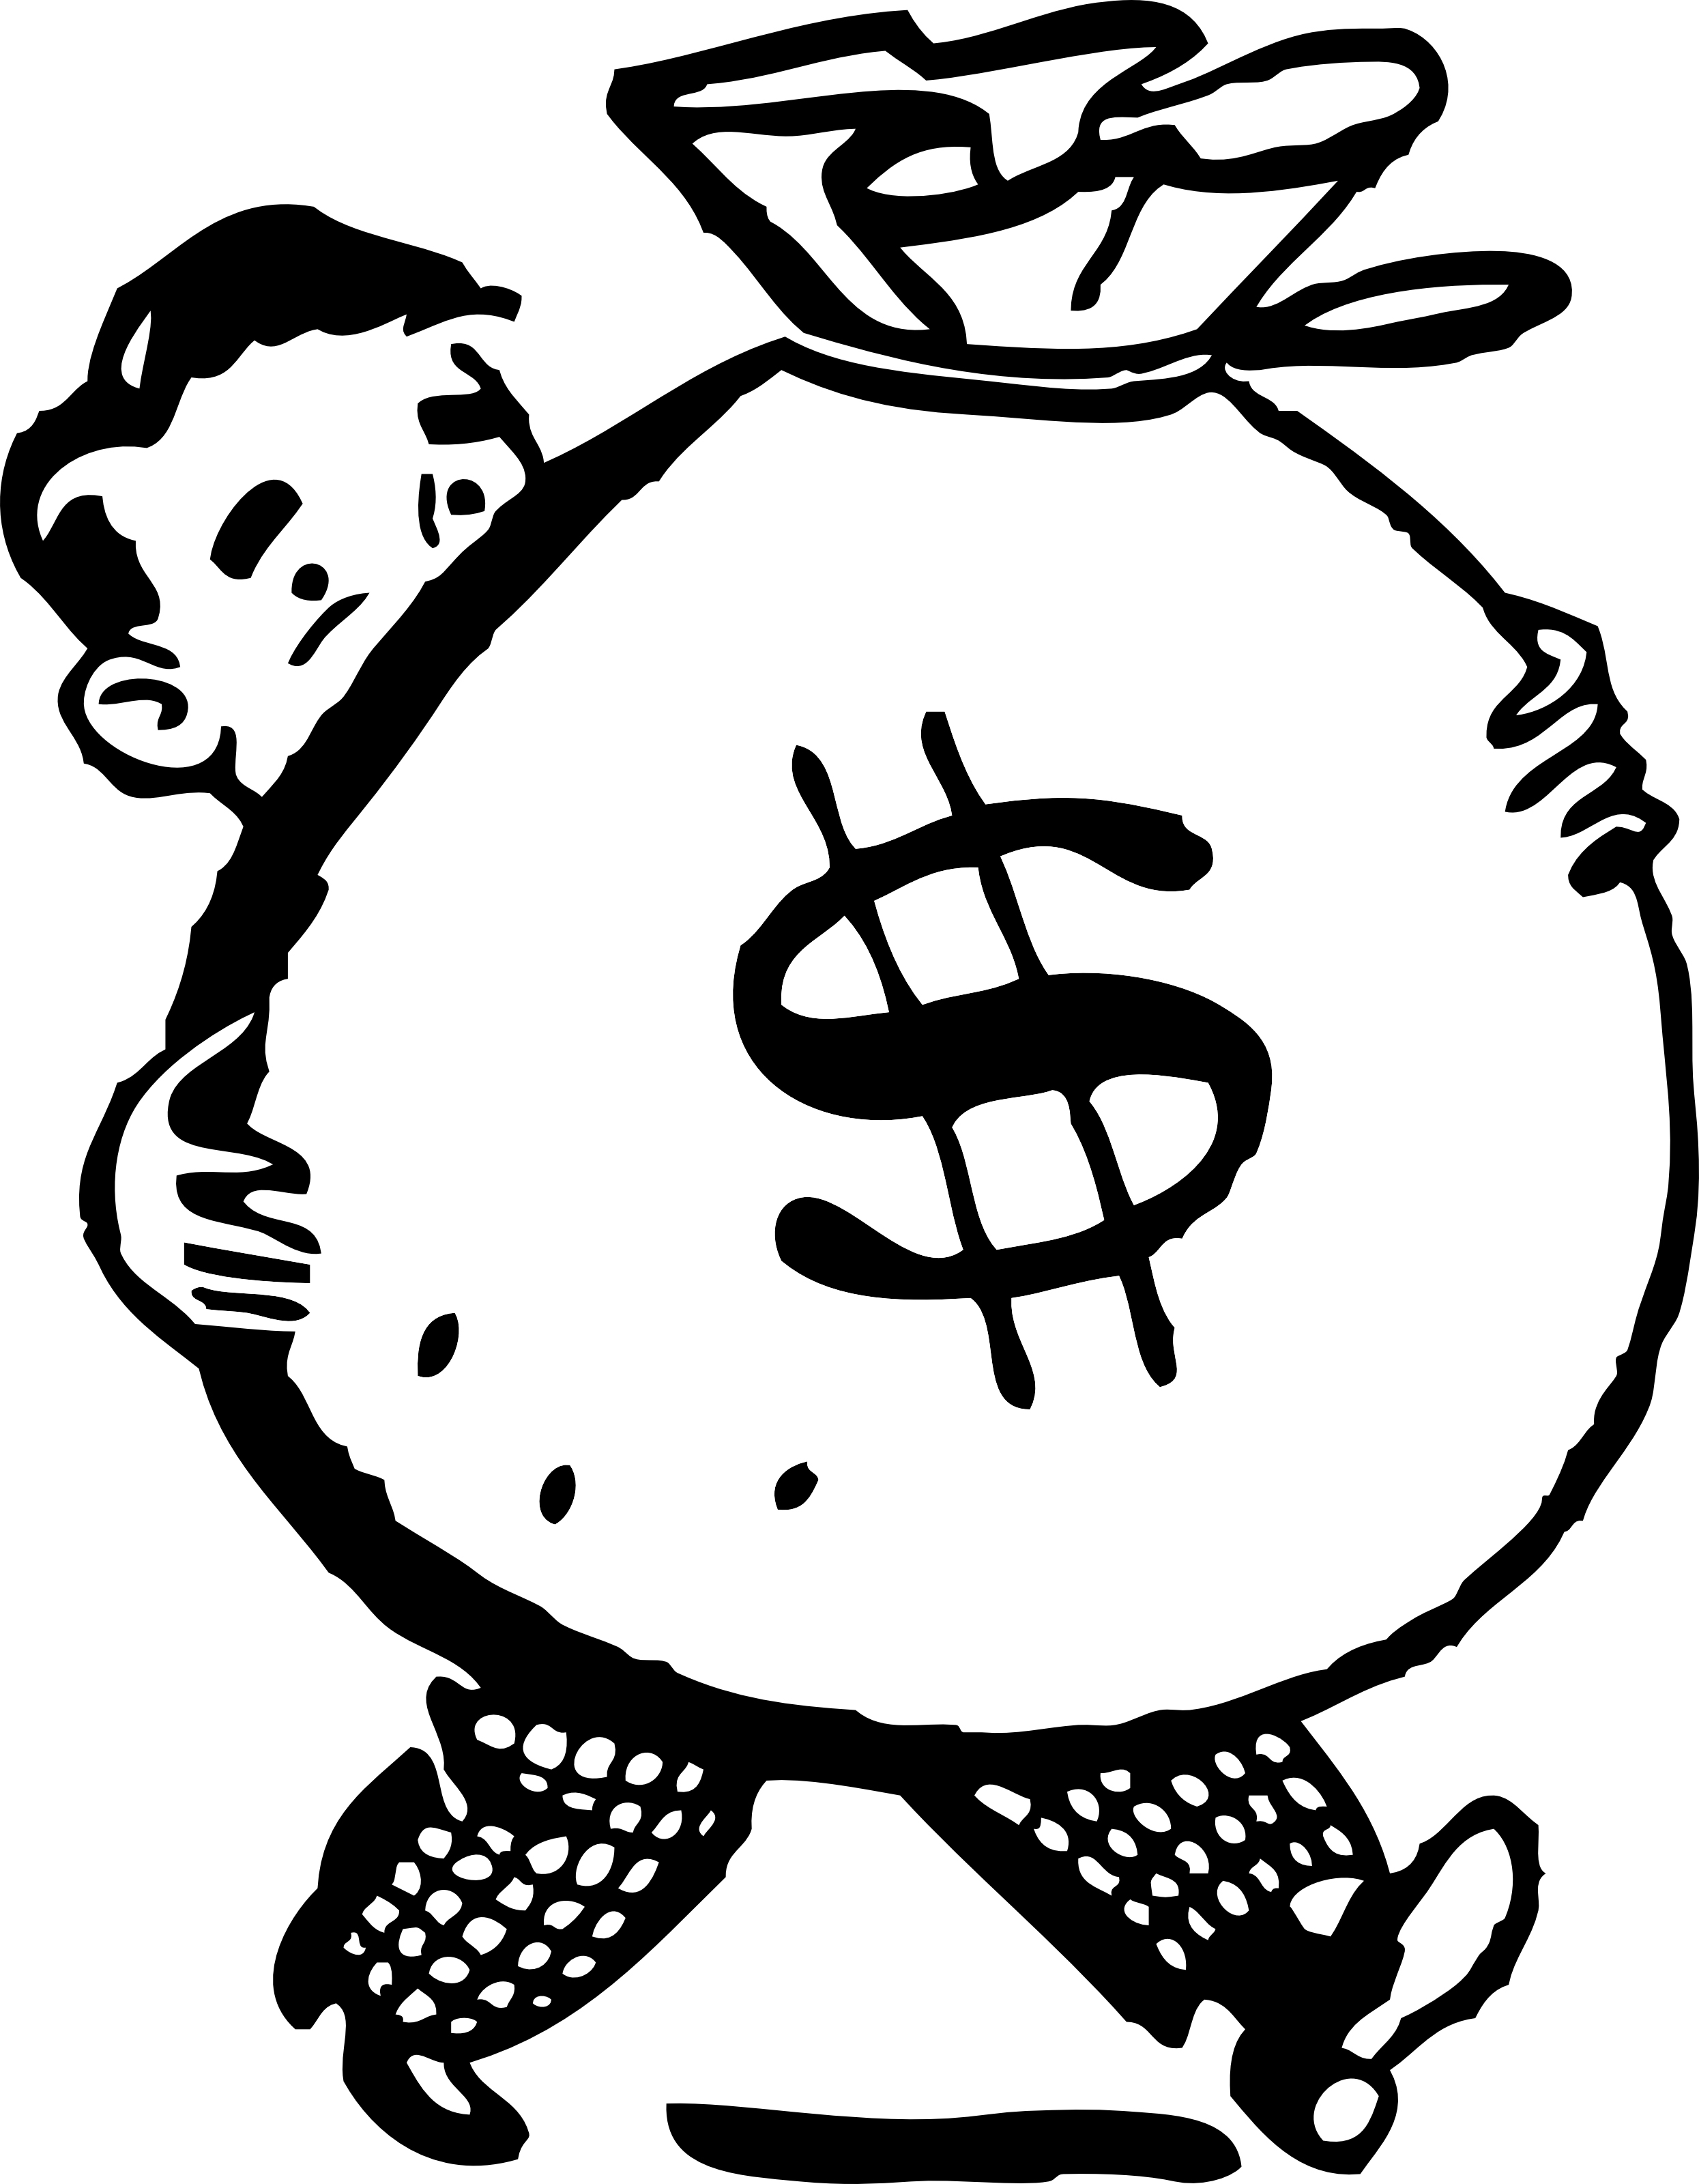 Clipart Illustration Of Man Carrying Big Bag Of Money With Dollar Sign